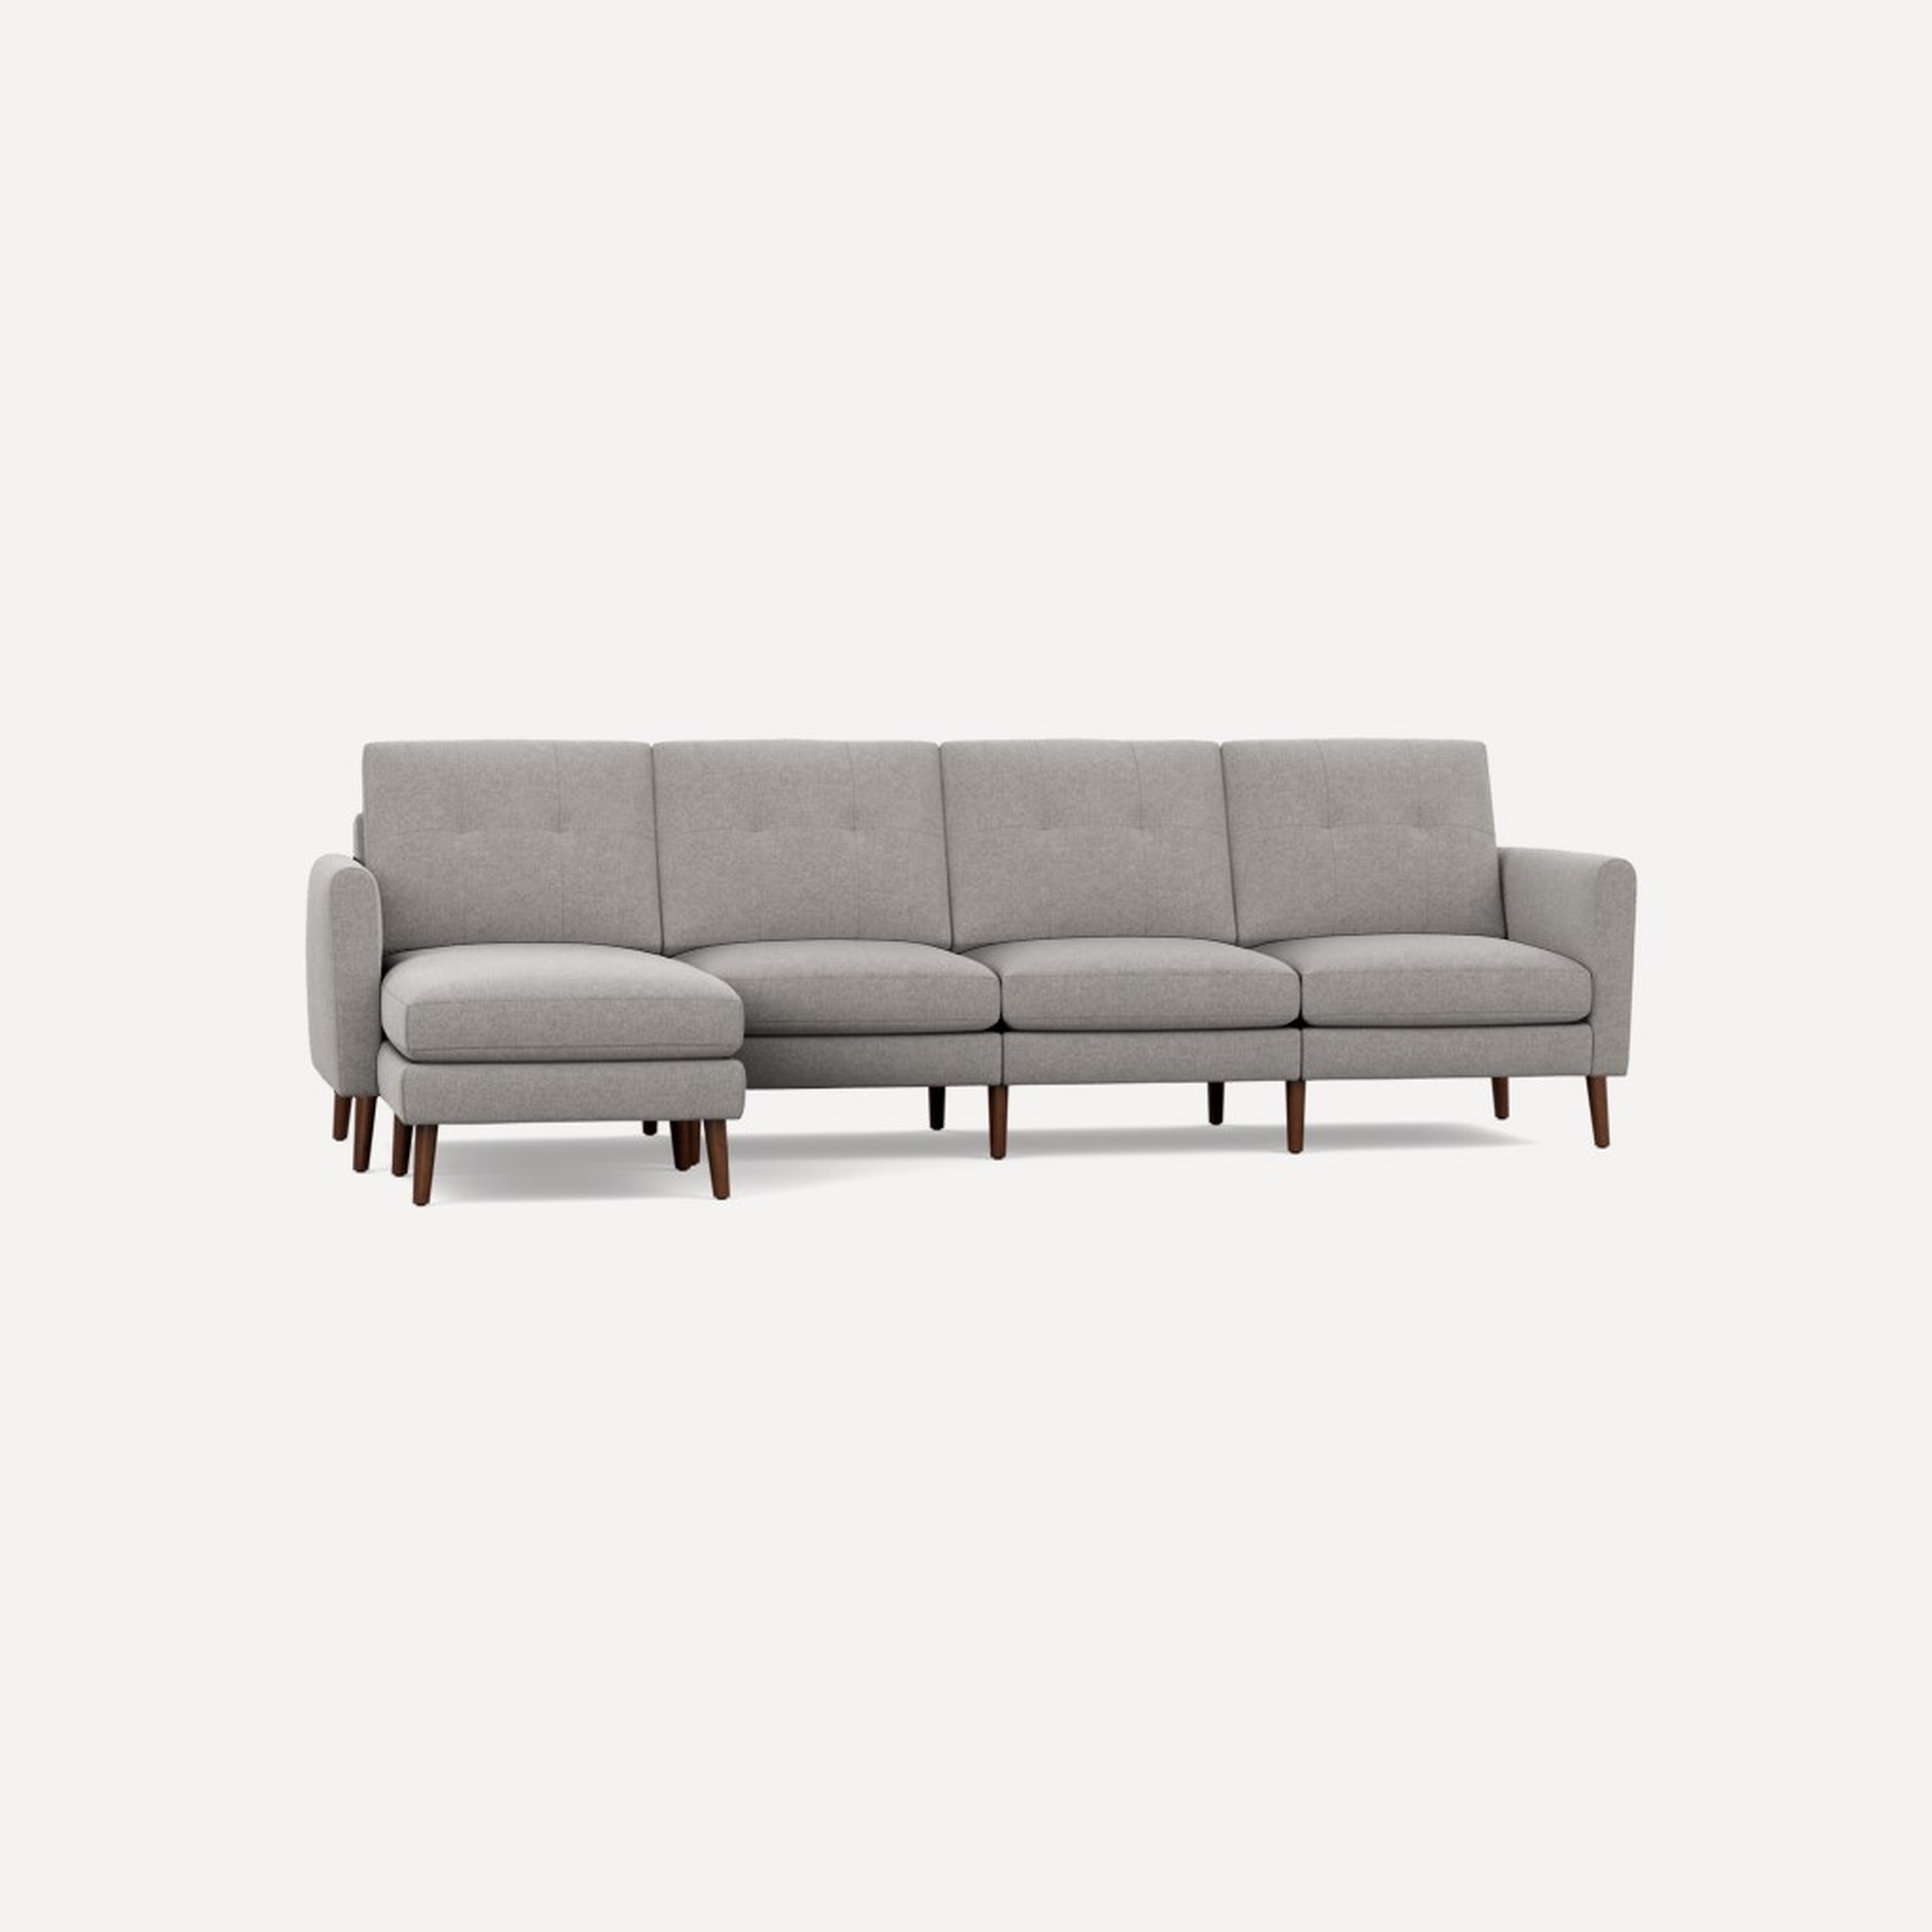 Nomad King Sectional - High Arms, Crushed Gravel Fabric, Dark Wood Legs, Chaise - Burrow